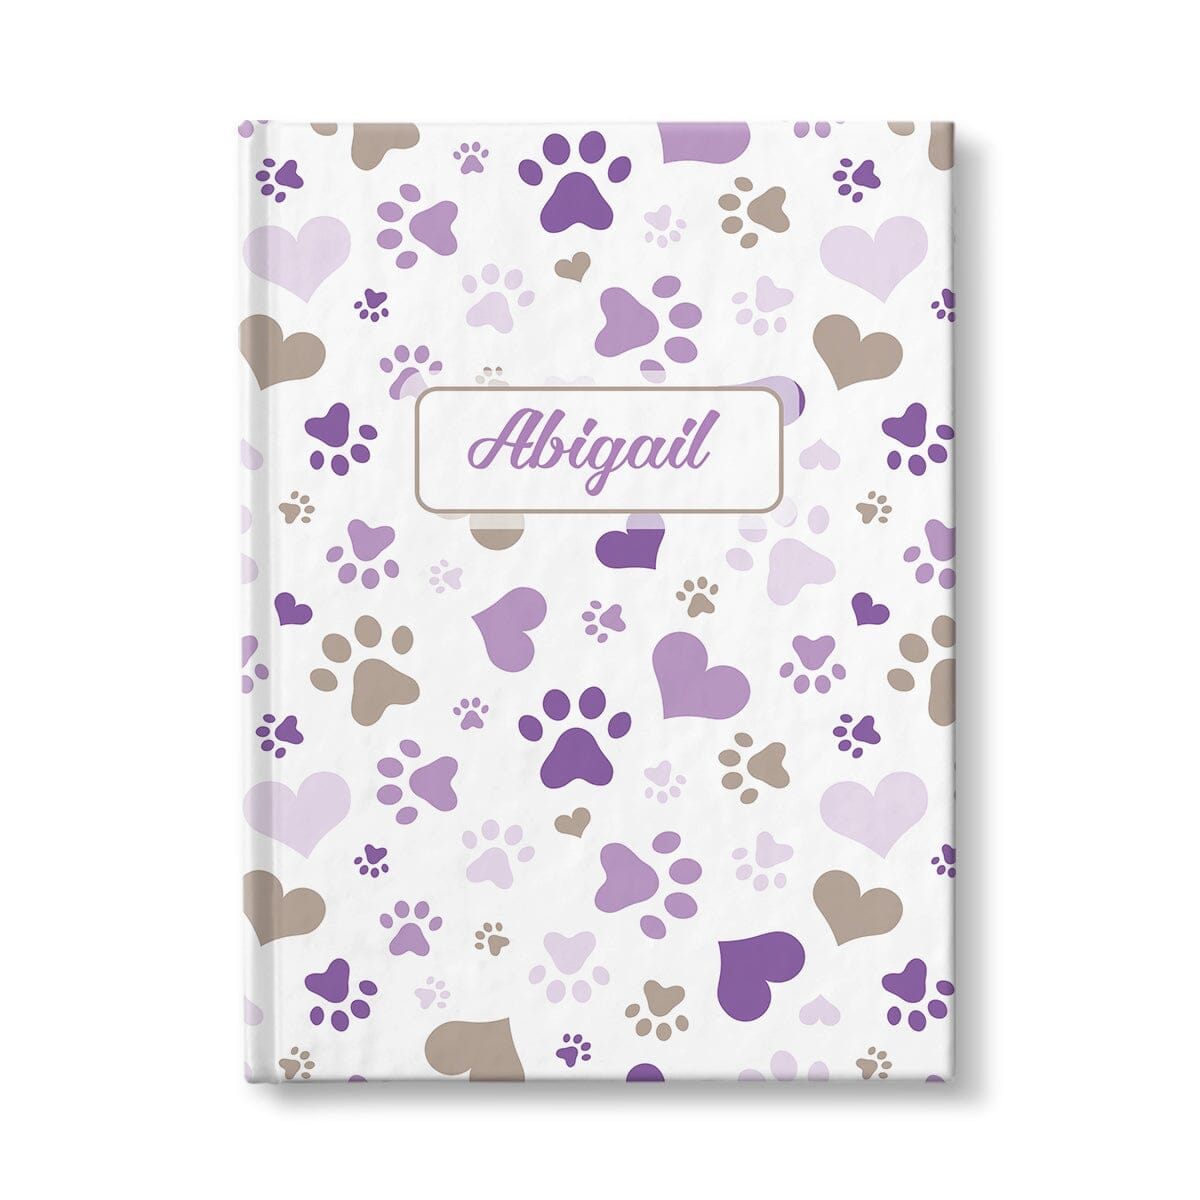 Personalized Purple Hearts and Paw Prints Journal at Artistically Invited.